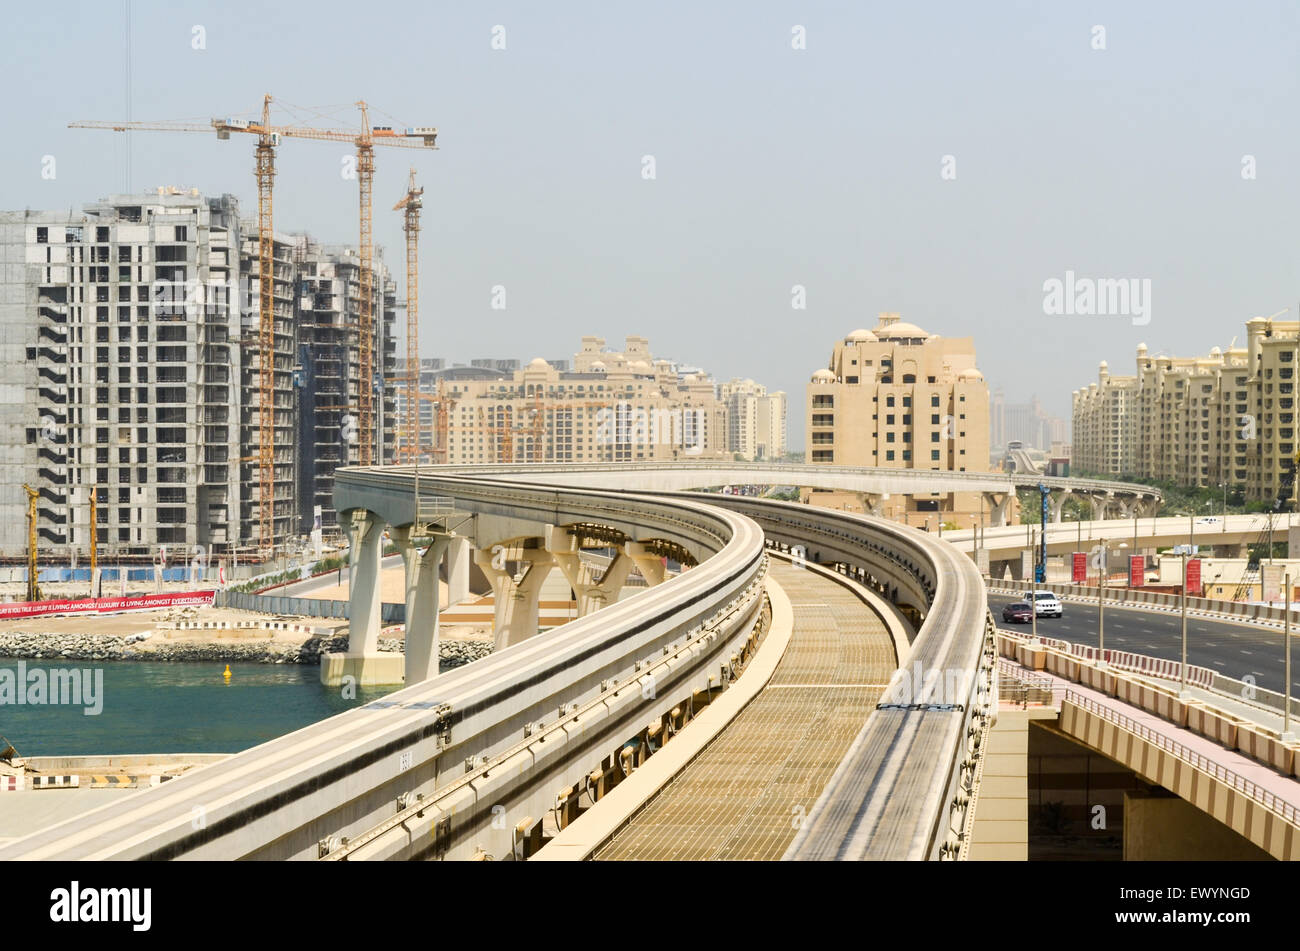 View of Palm Jumeirah and the skyrail from the metro monoral Stock Photo